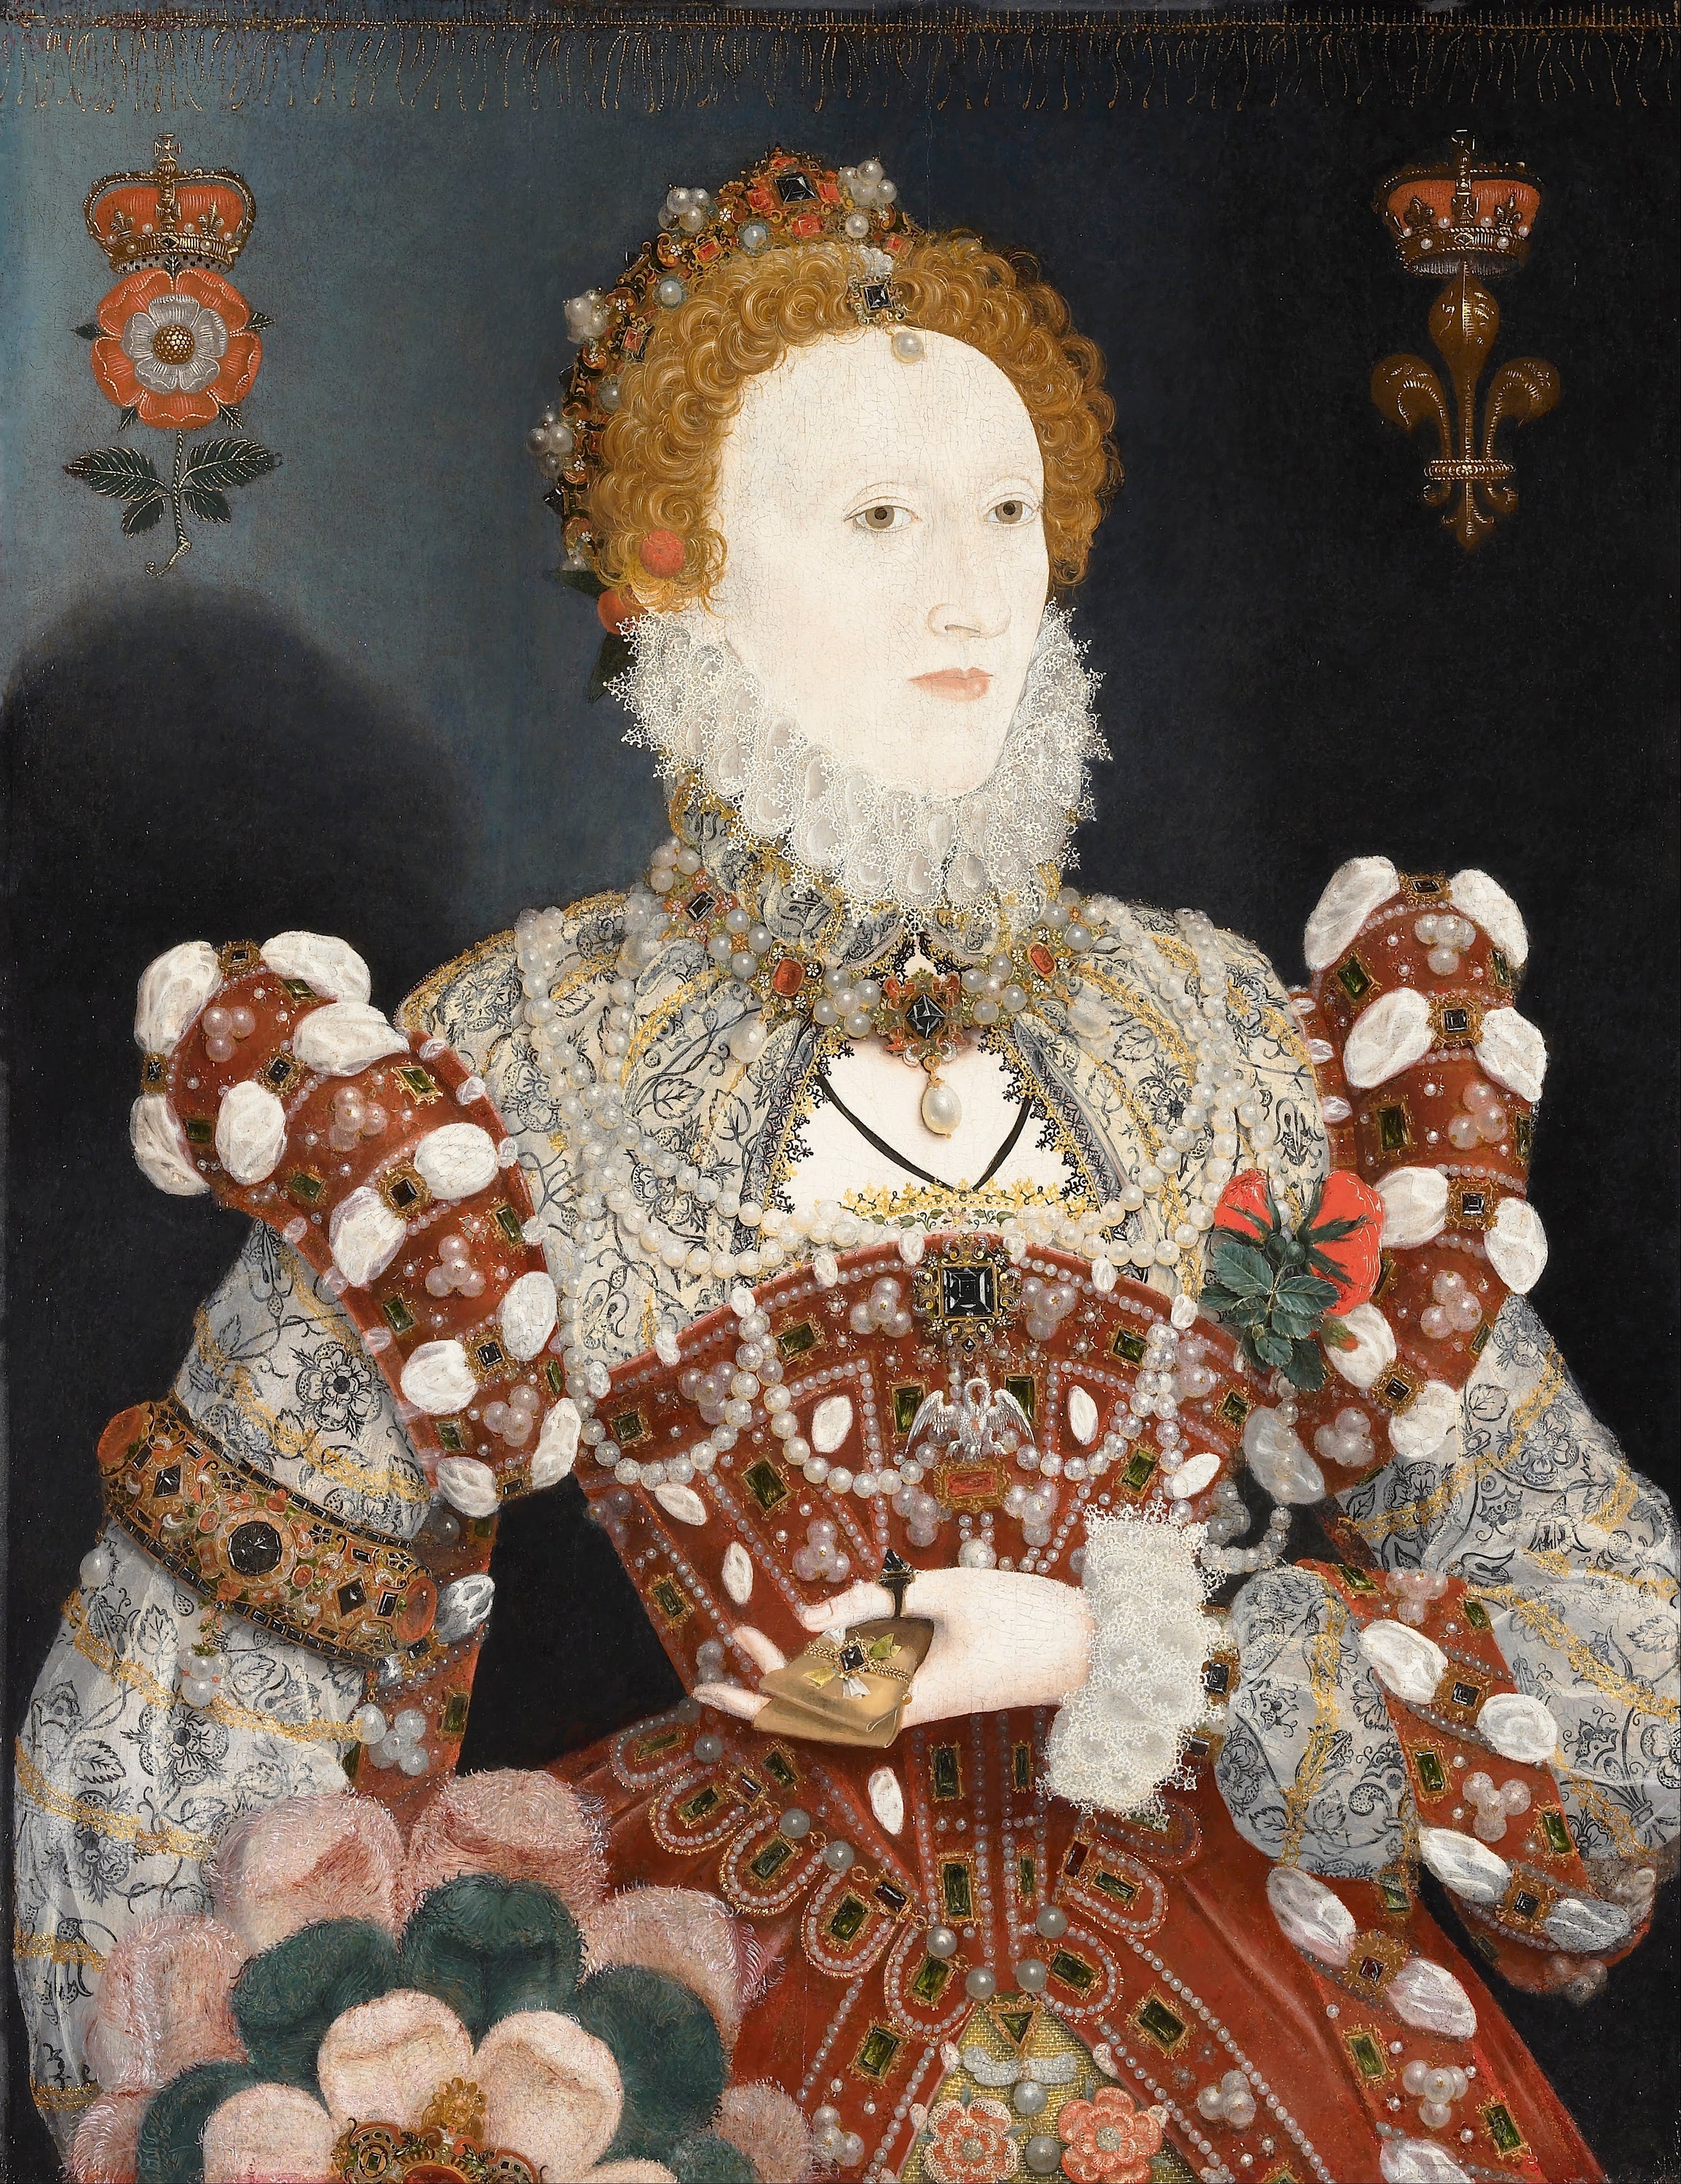 young mary queen of scots portrait